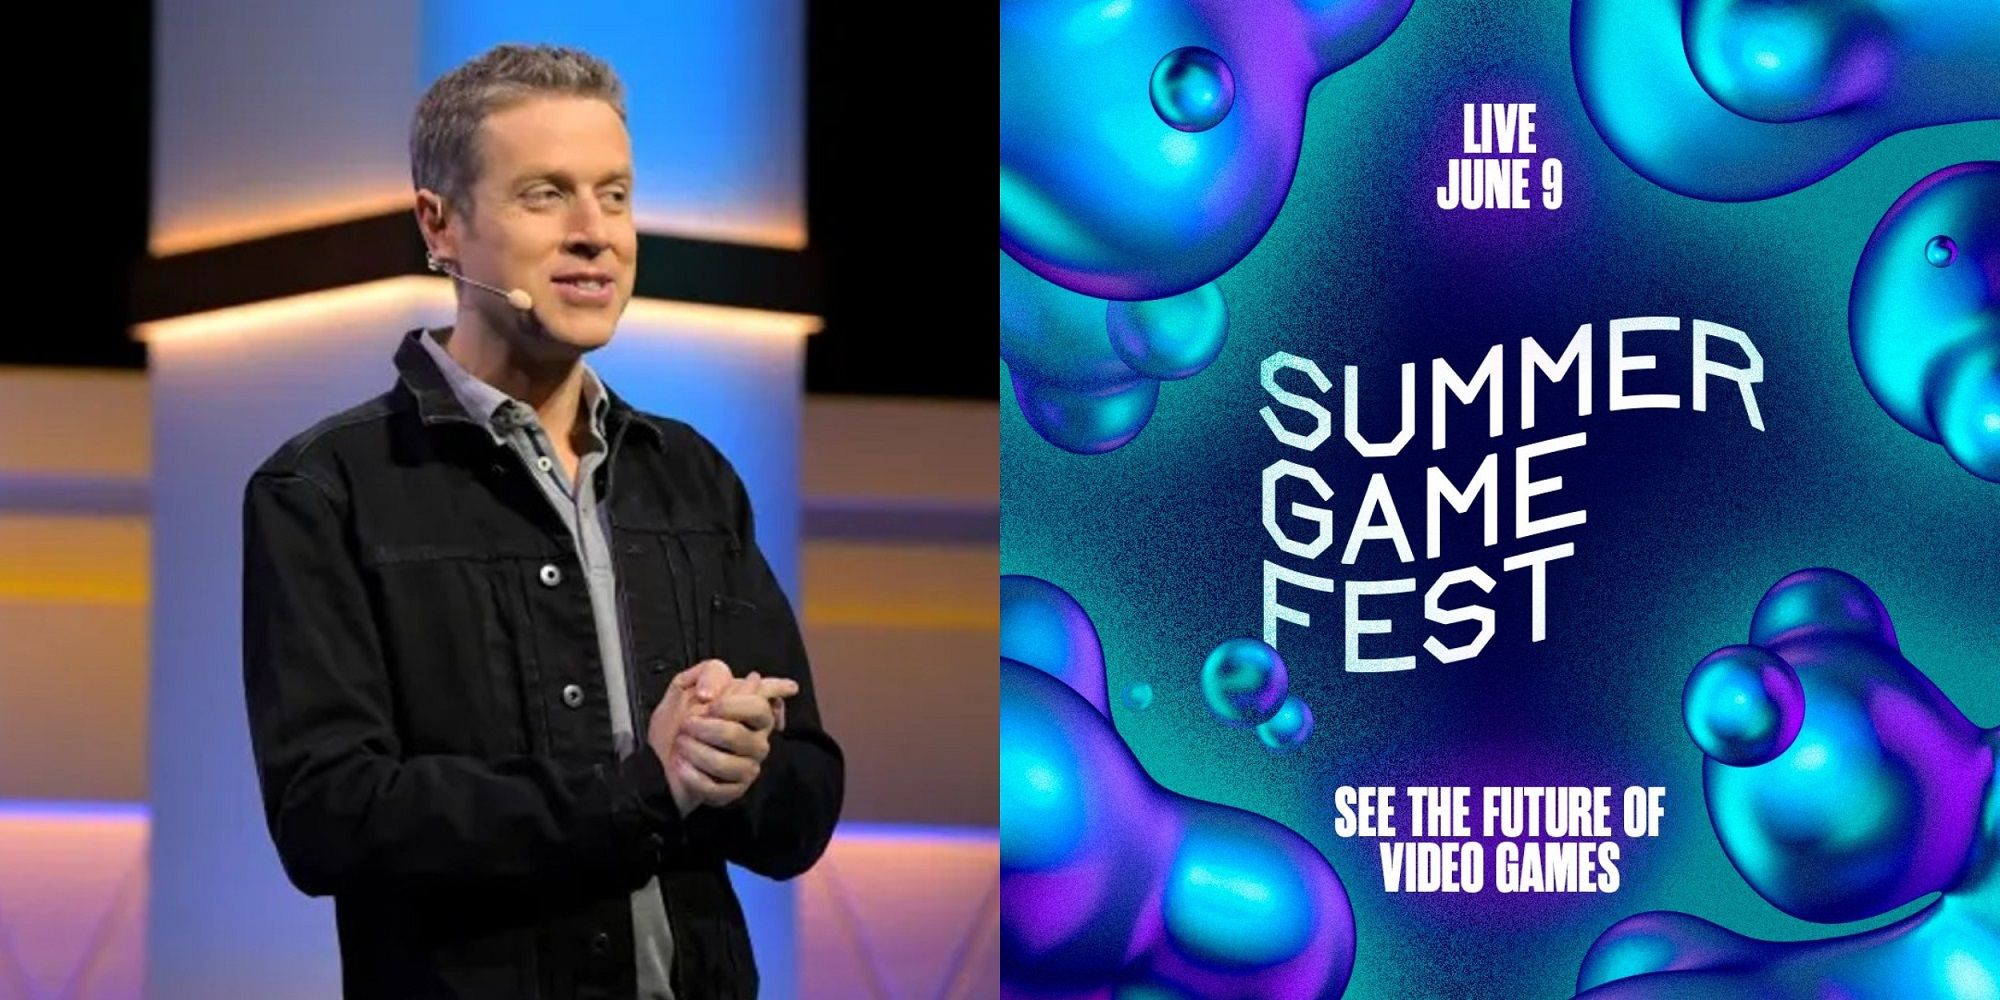 Summer Game Fest Will Be Primarily Focused On Already Announced Games Says Geoff Keighley